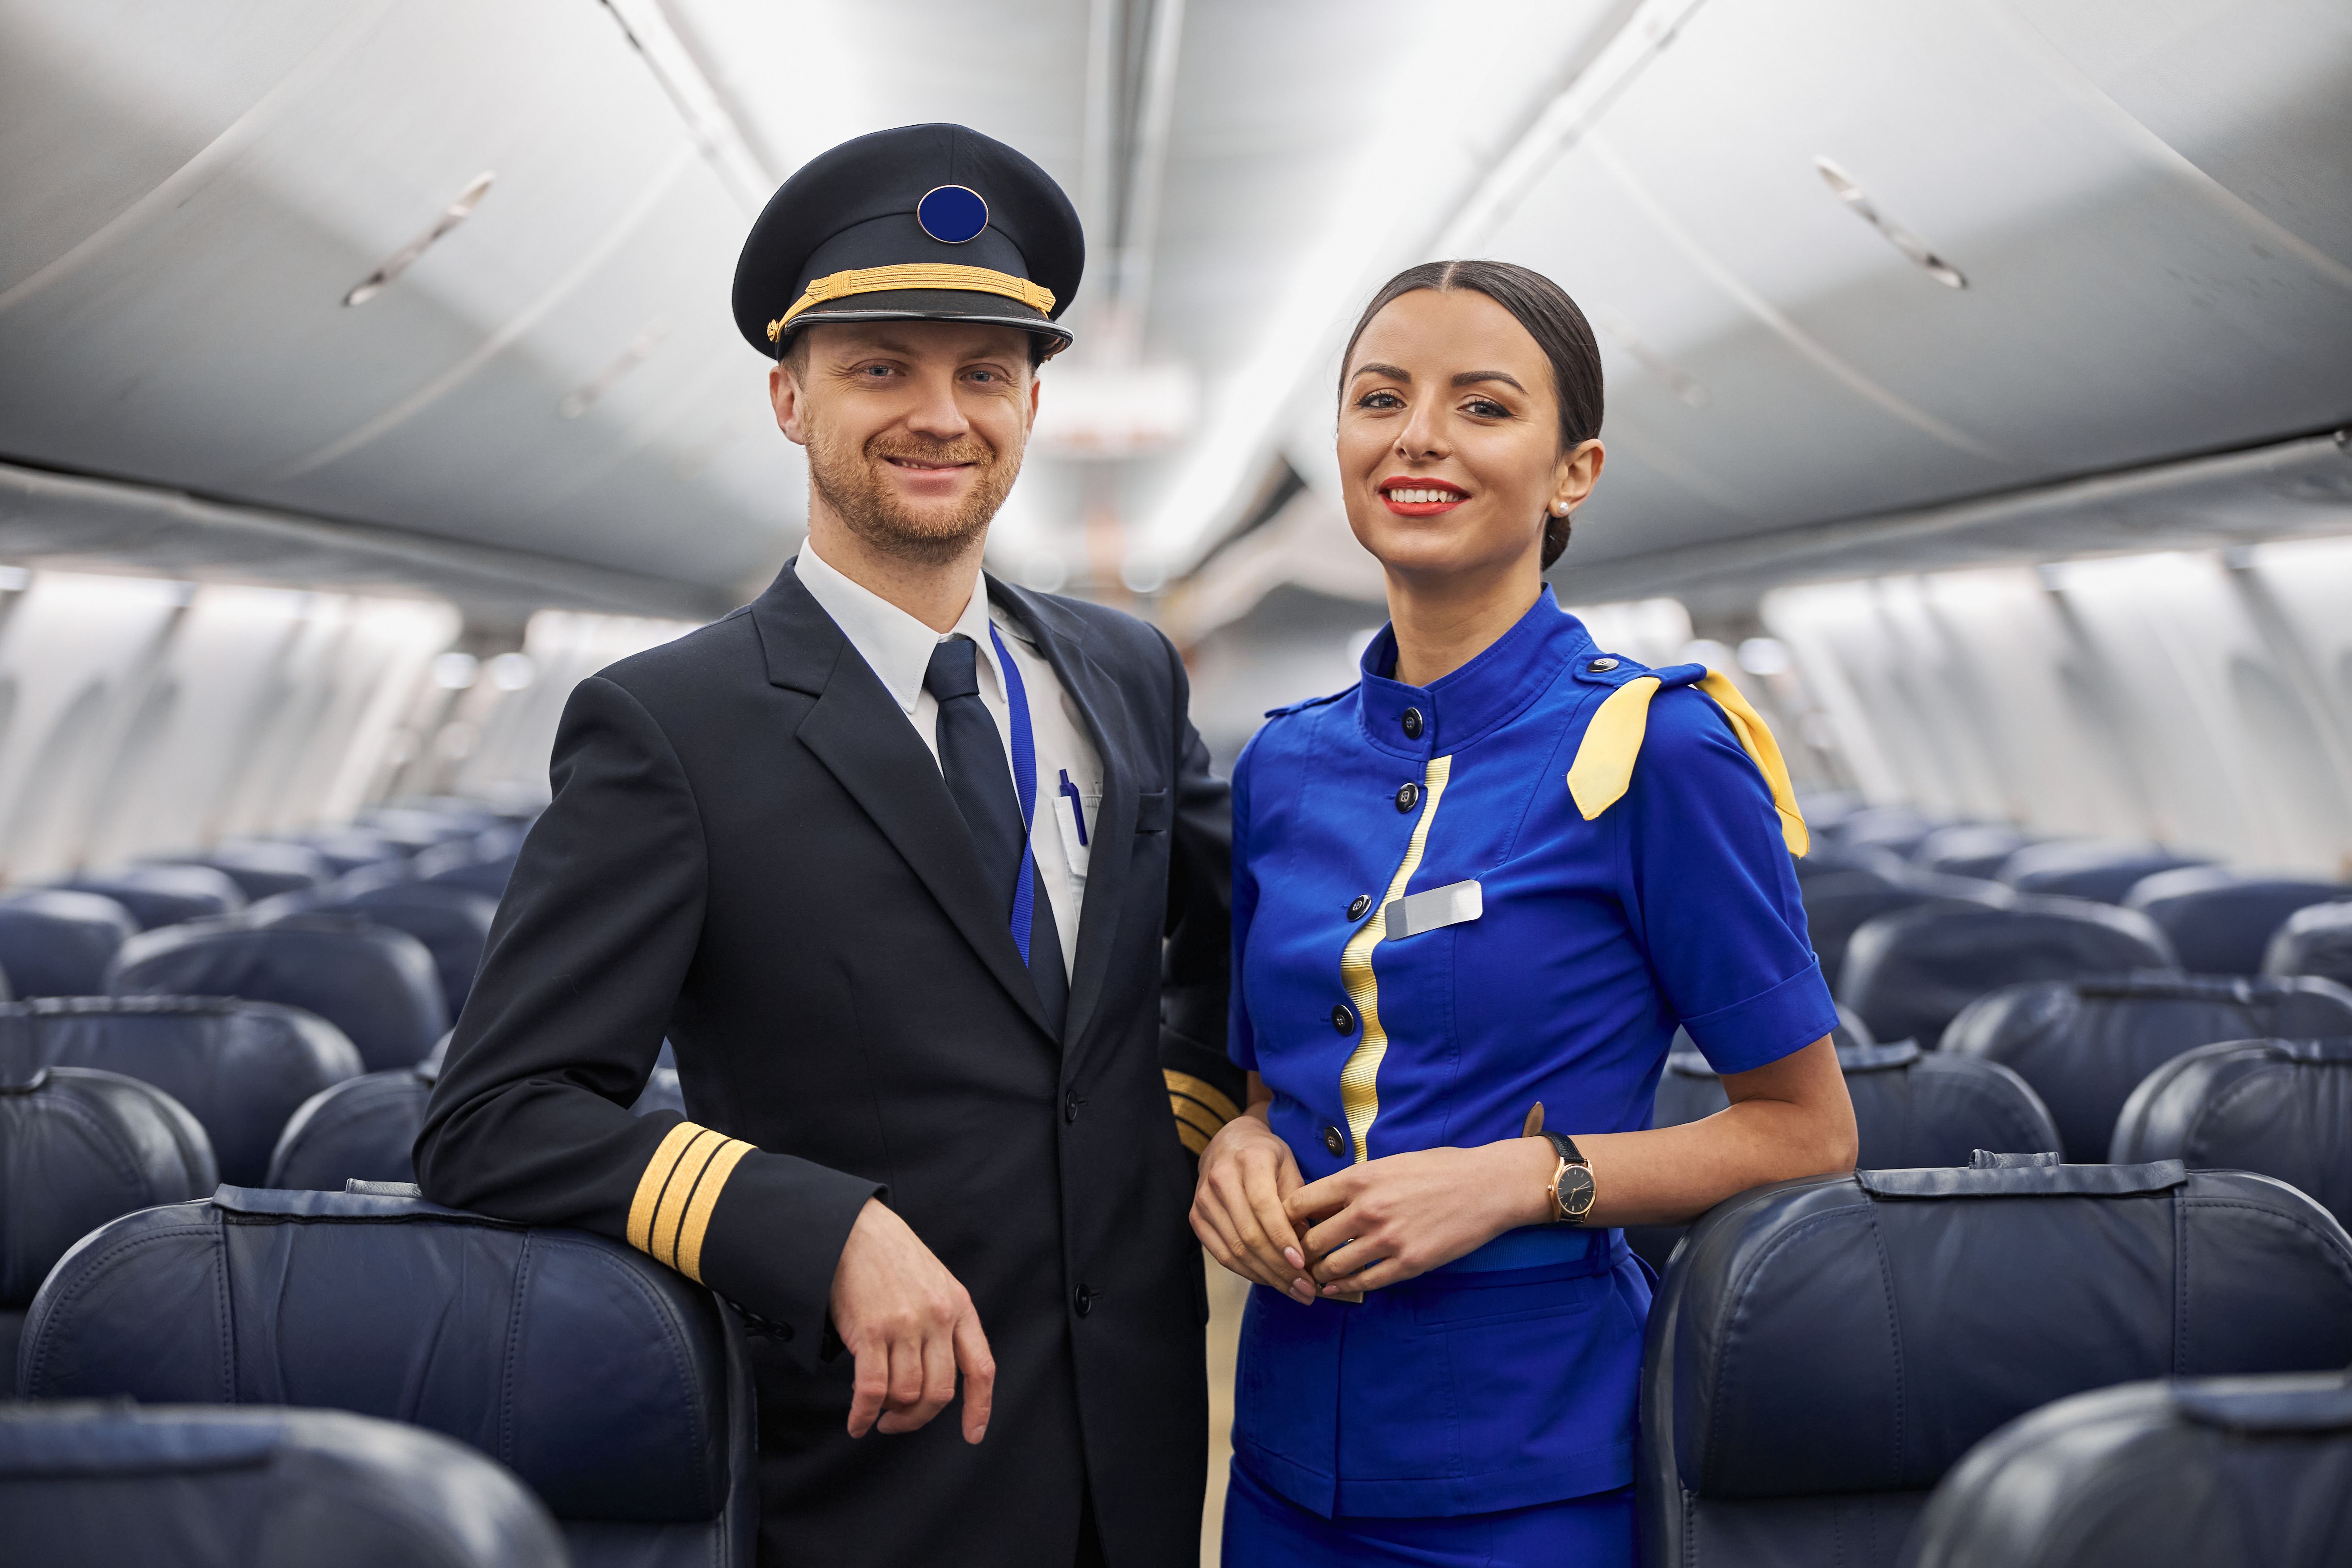 Portrait of a pilot and a cabin crew member inside a plane 